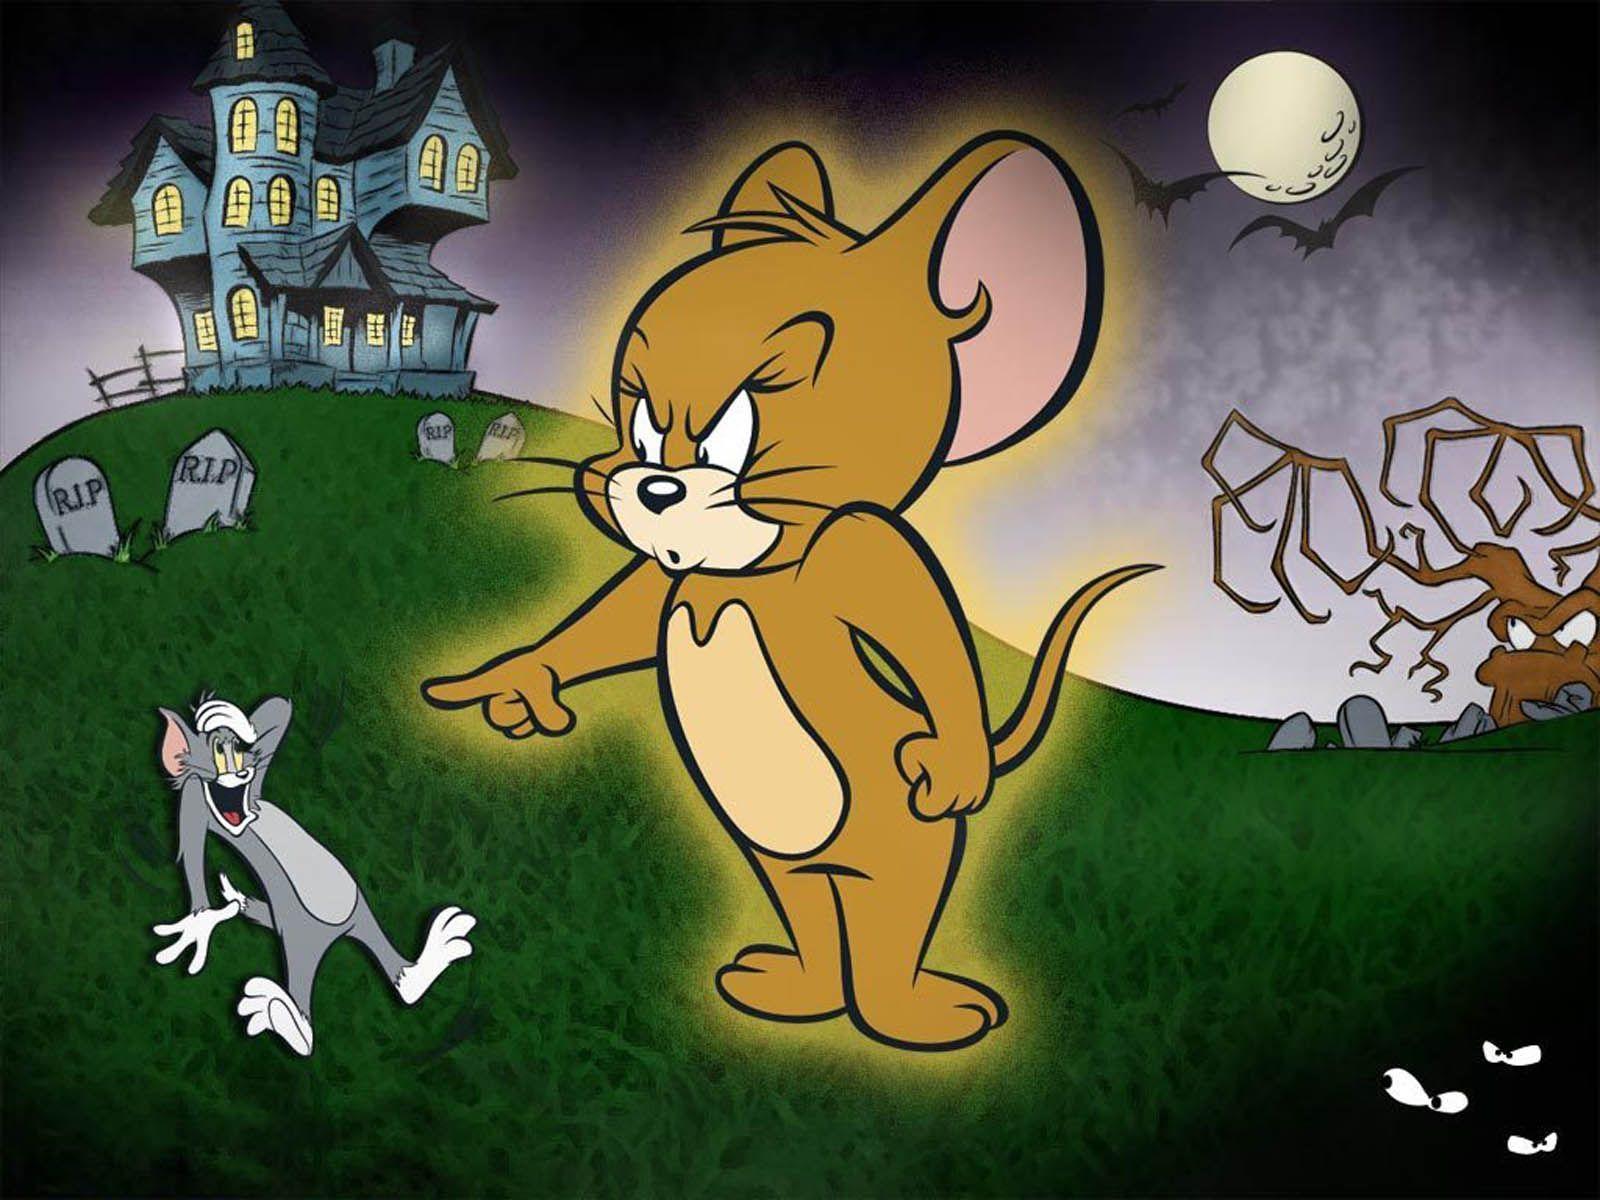 Lovely Wallpaper of Funny Characters Tom & JerryPhotography